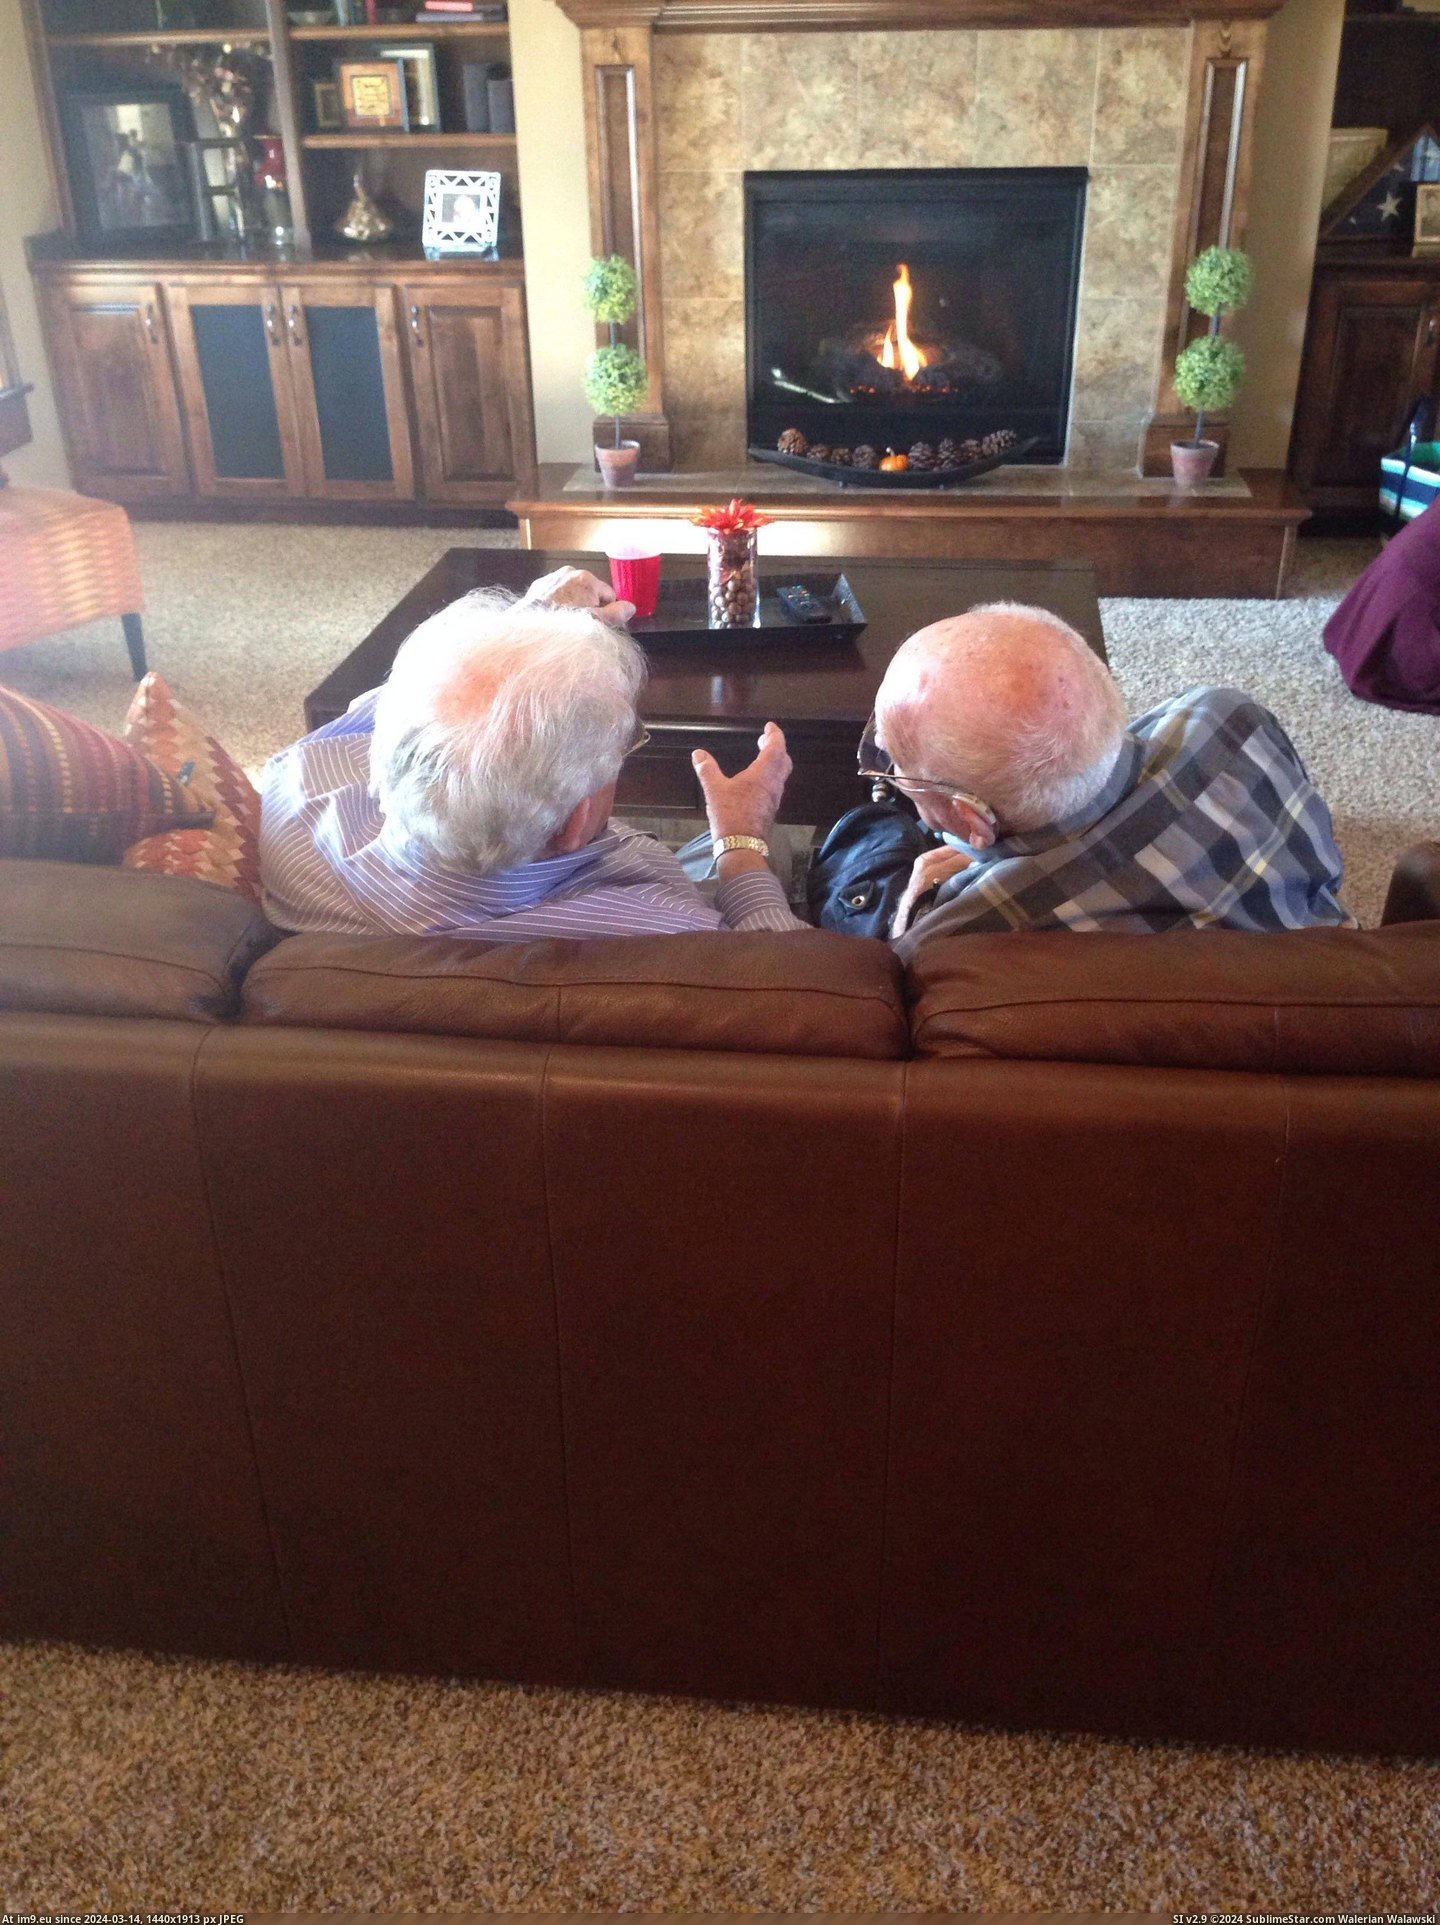 #Year #Old #Thanksgiving #Reminiscing #Brother #Grandpa [Aww] My 87 year old Grandpa and his 92 year old brother reminiscing on Thanksgiving. Pic. (Image of album My r/AWW favs))